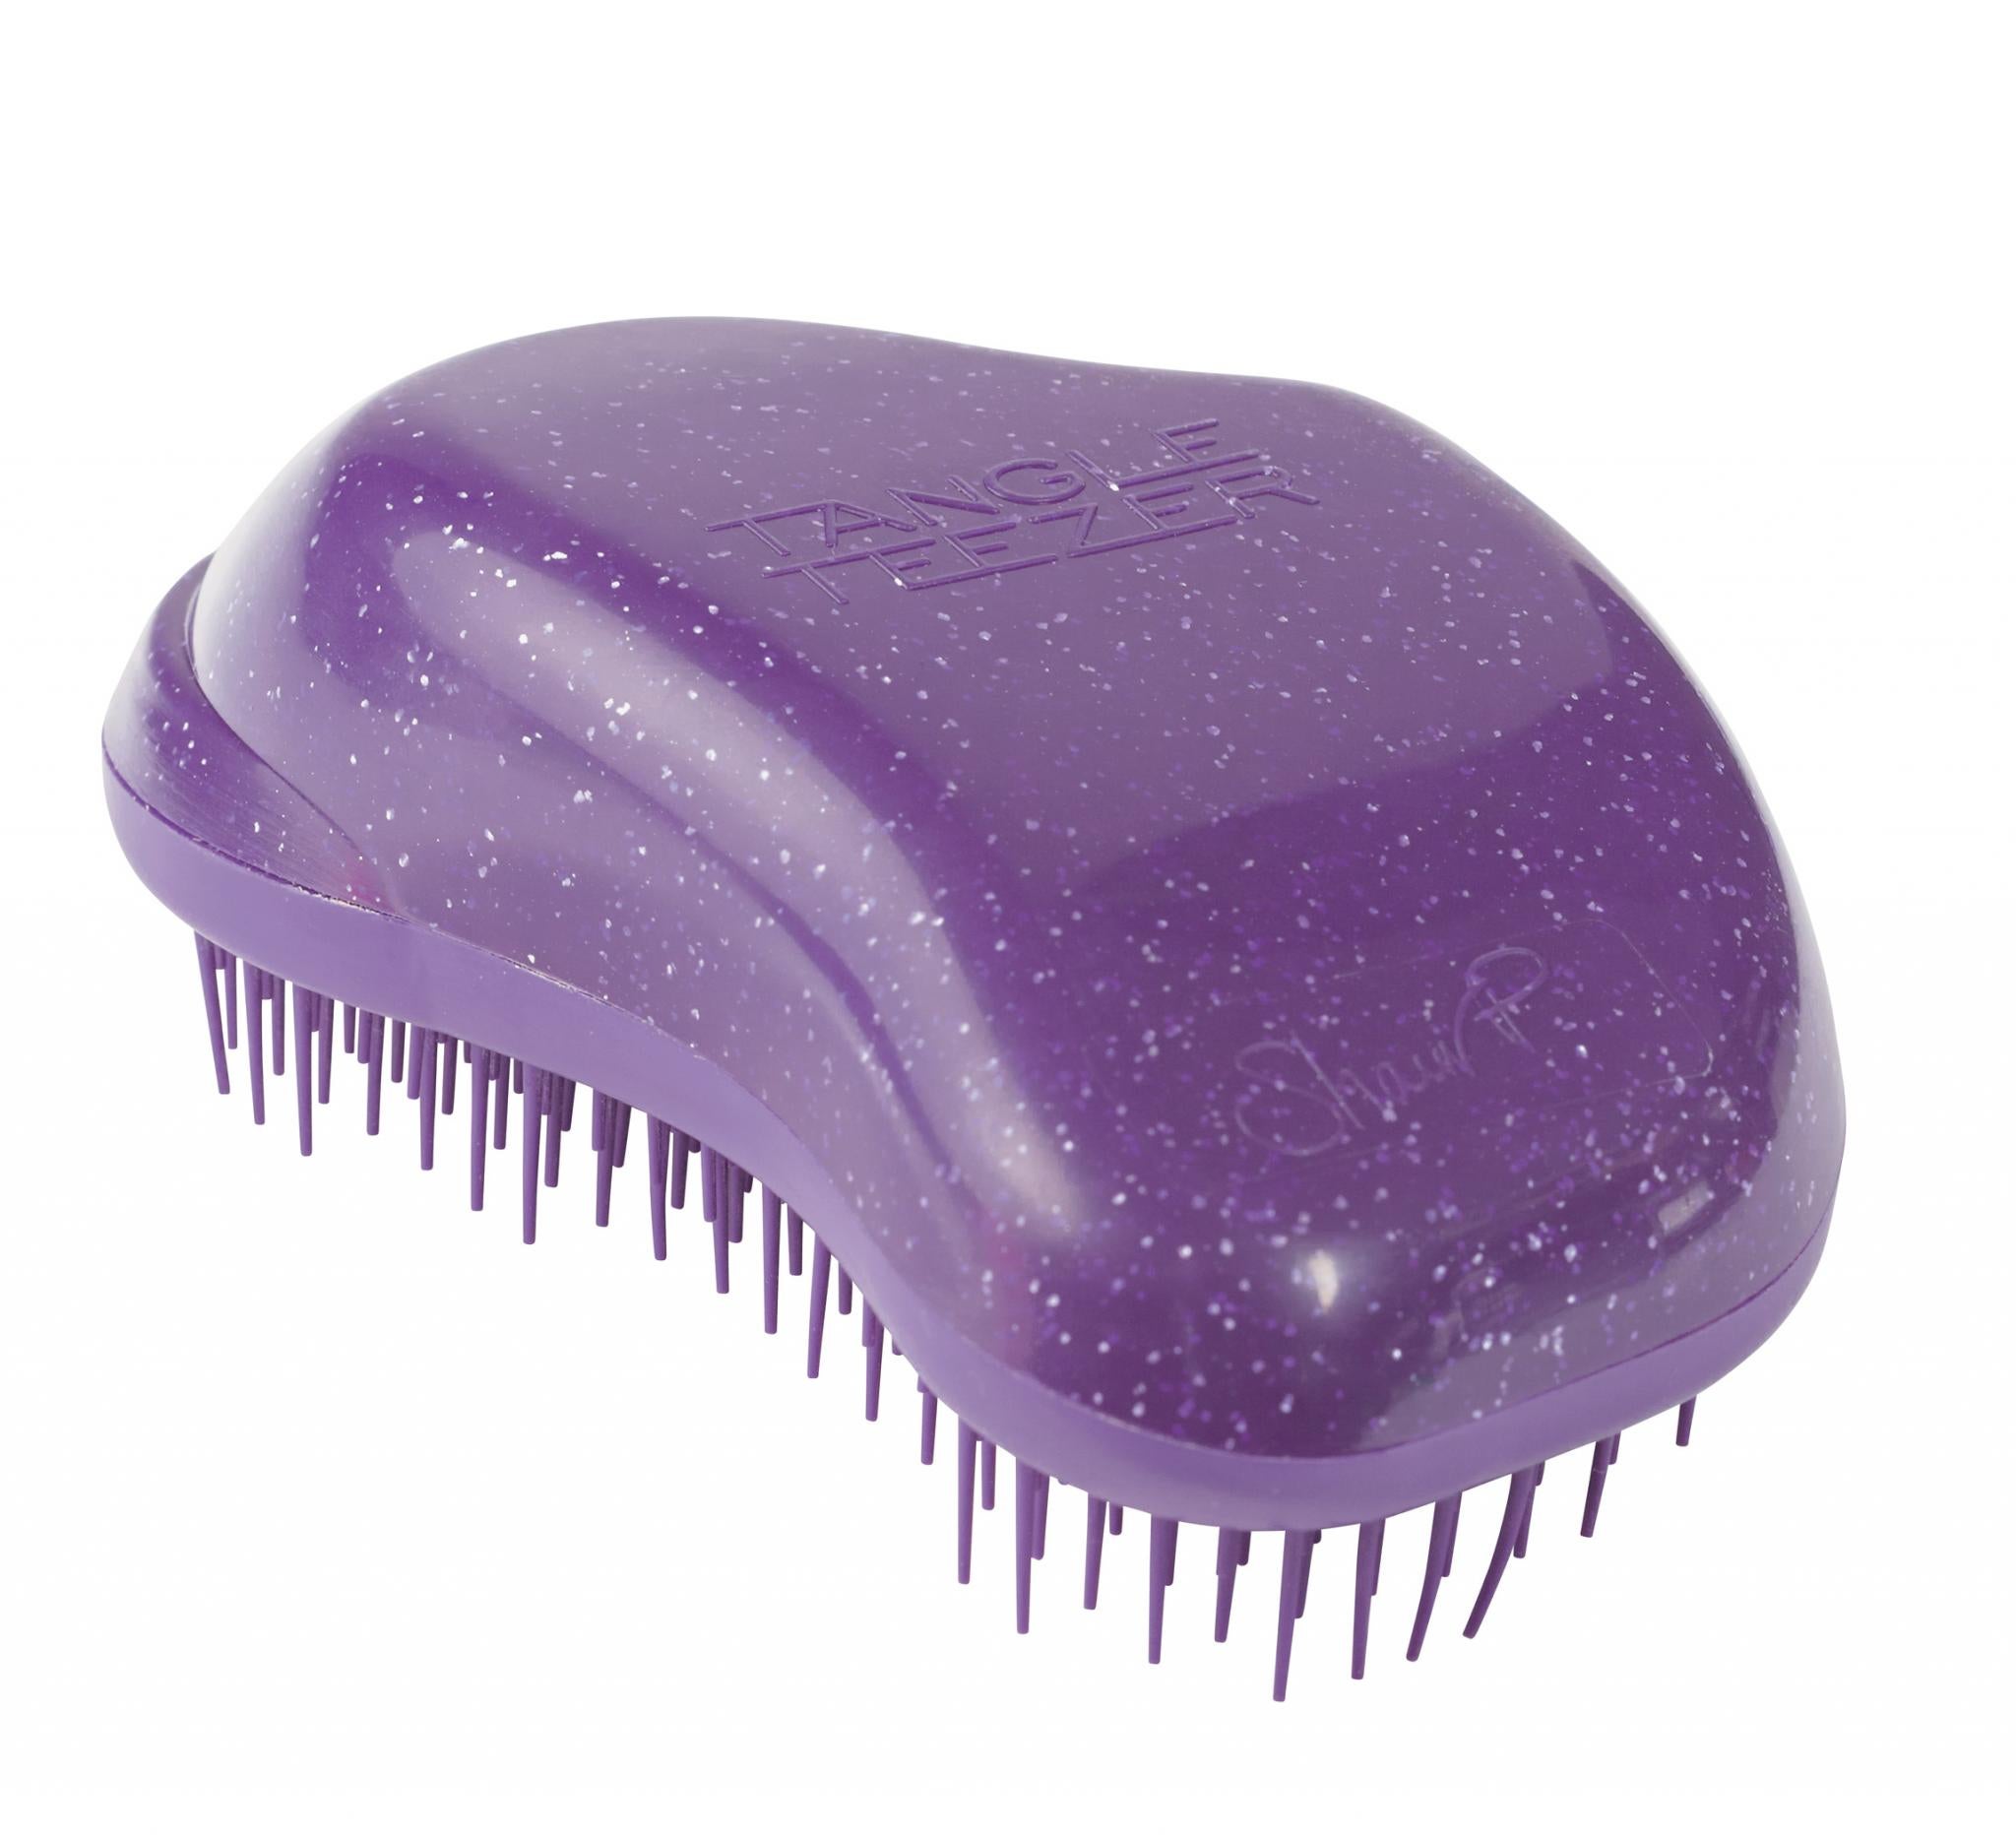 Editor Obsession: The Tangle Teezer